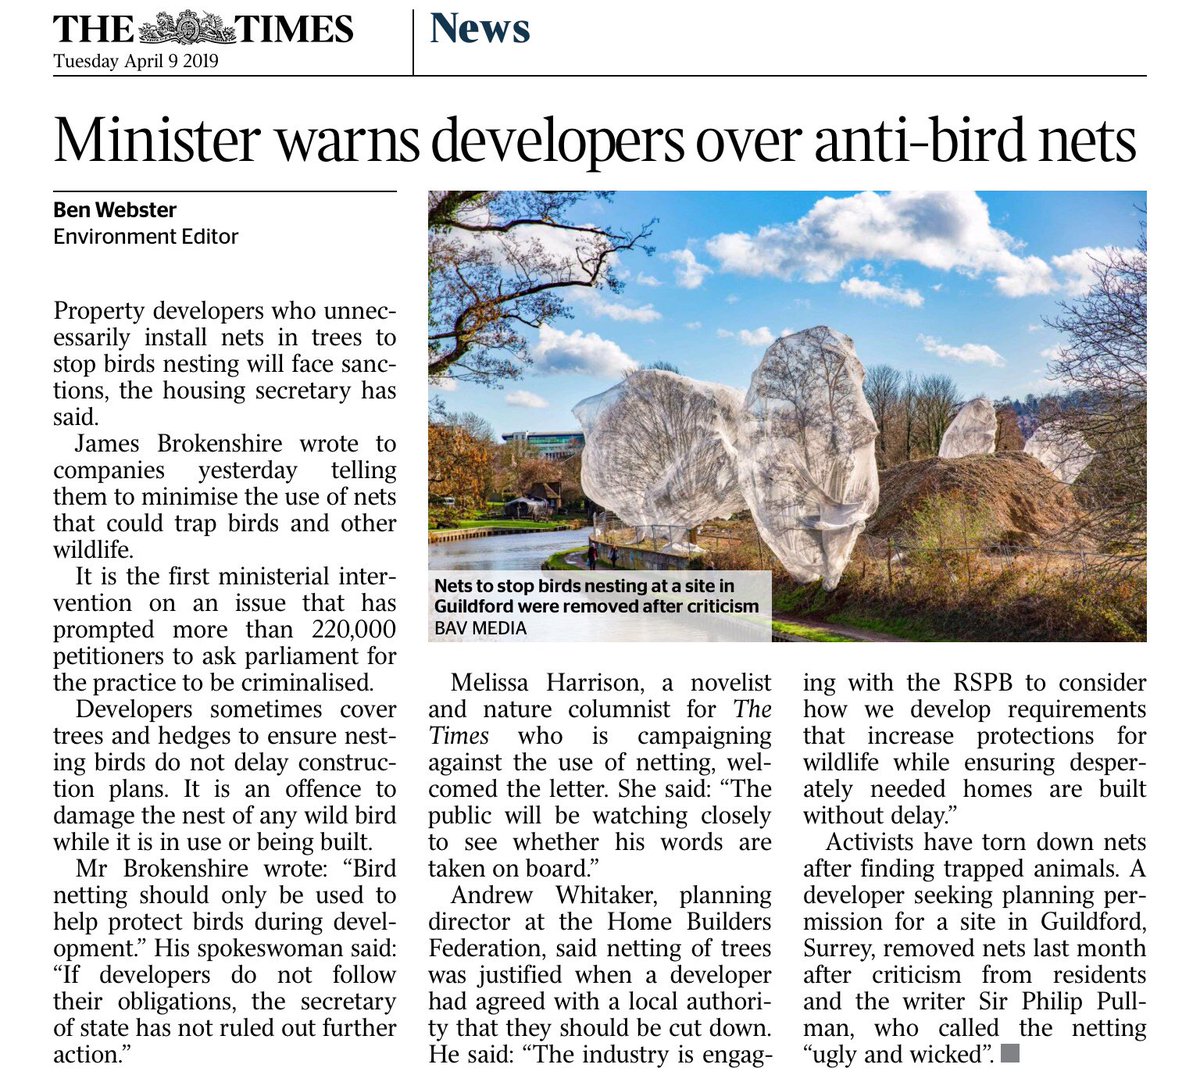 Disgusting!

Yet another example of how greedy Developers sacrifice our wild life and your countryside for their gain.

We must #saveourgreenbelt

⁦@BimAfolami⁩ ⁦@OliverHealdUK⁩